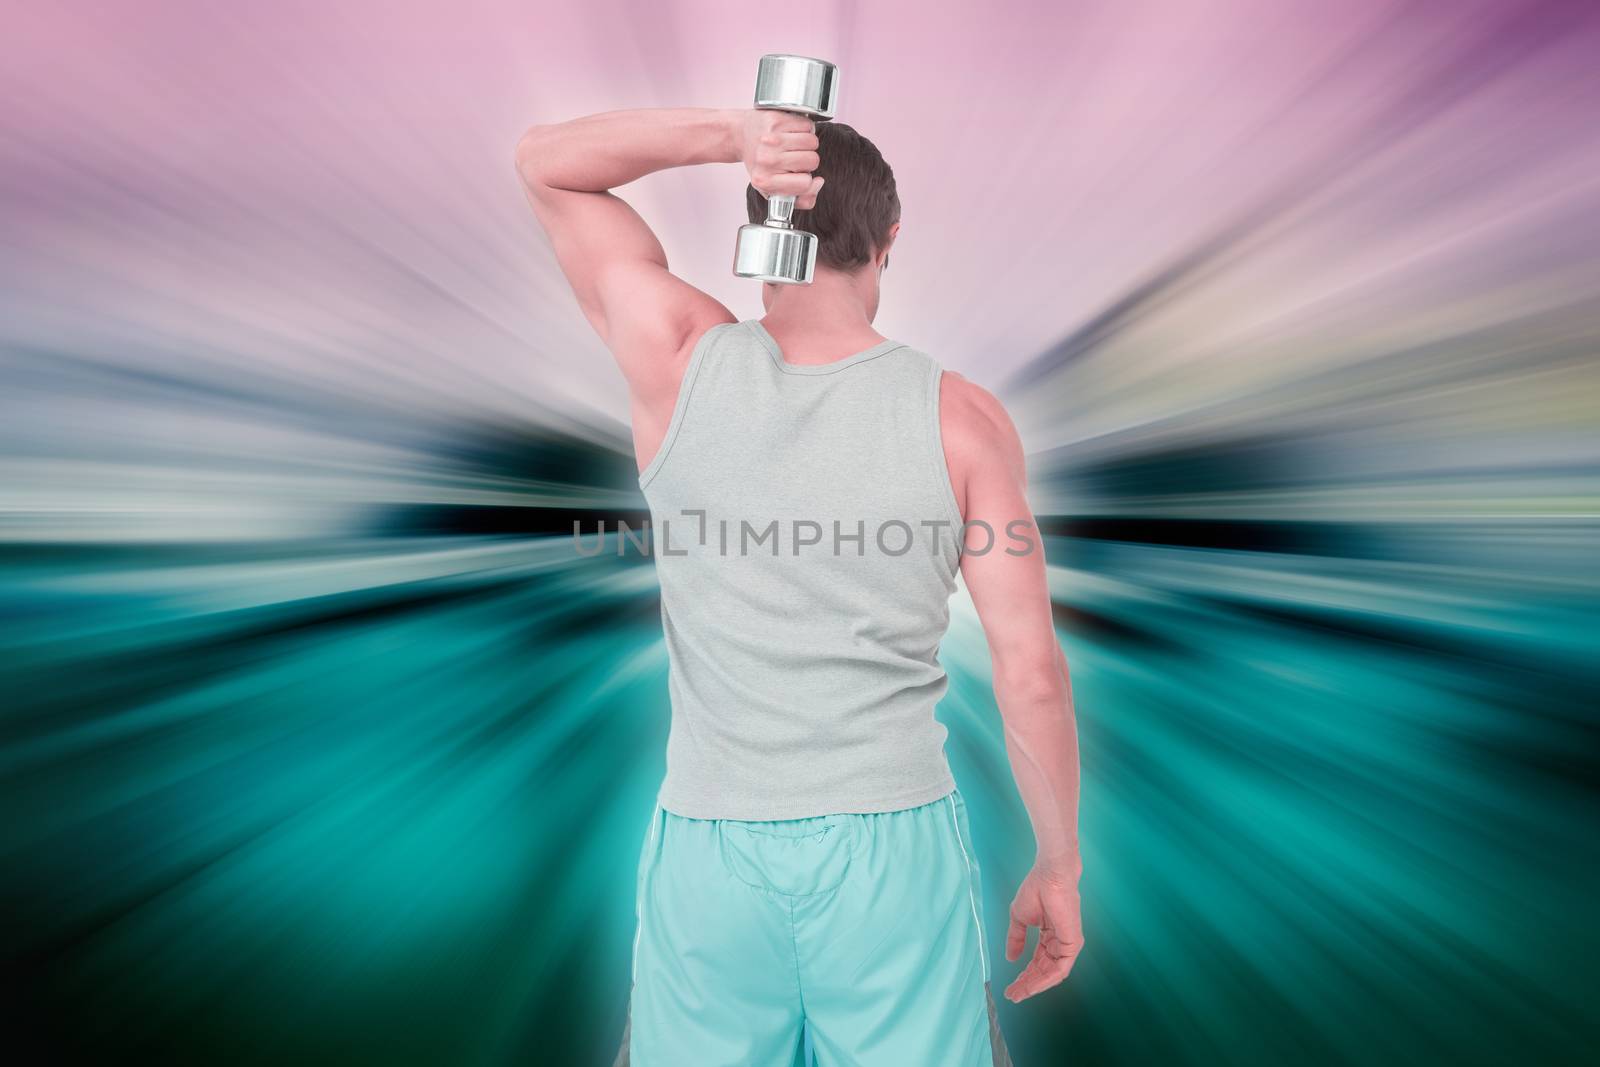 Rear view of a man exercising with dumbbell against abstract background